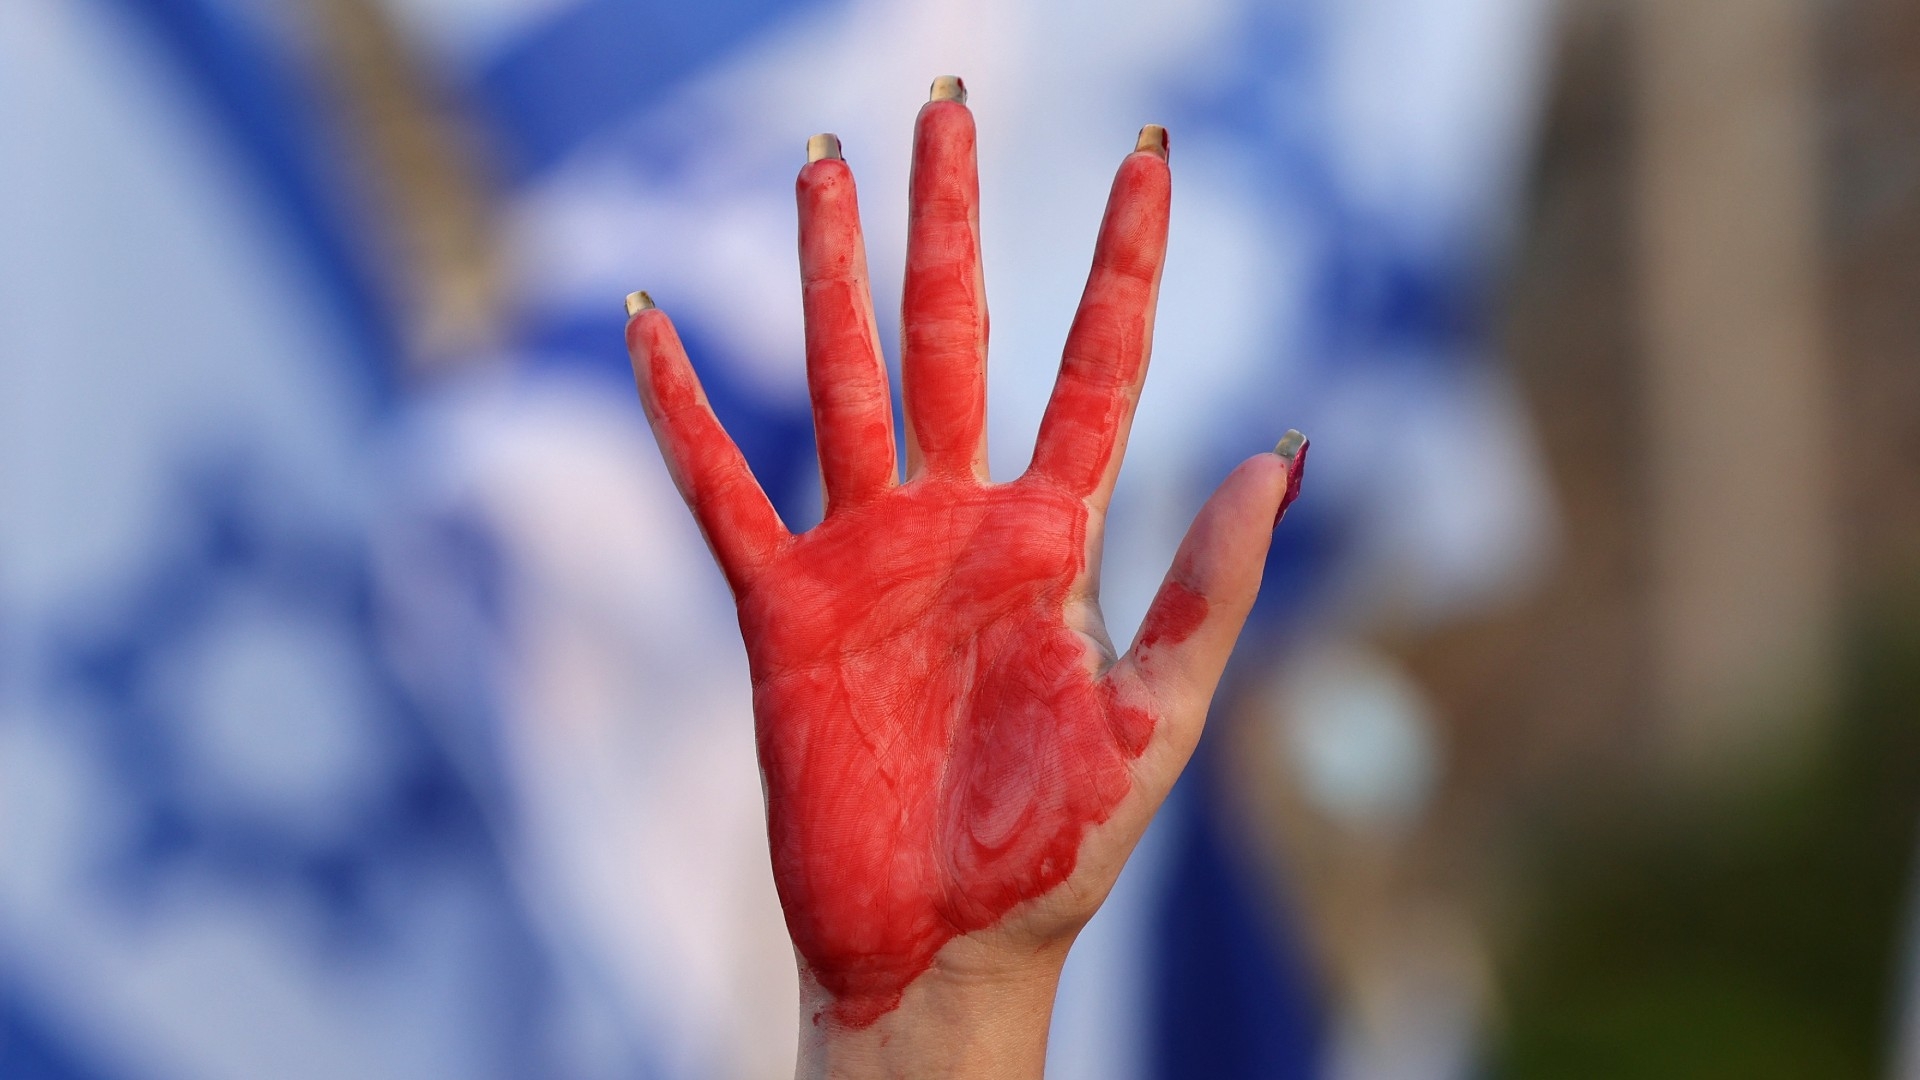 A demonstrator raises her hand, painted red, during a gathering to protest the Israeli government's judicial overhaul bill, in Tel Aviv on 6 May (AFP)